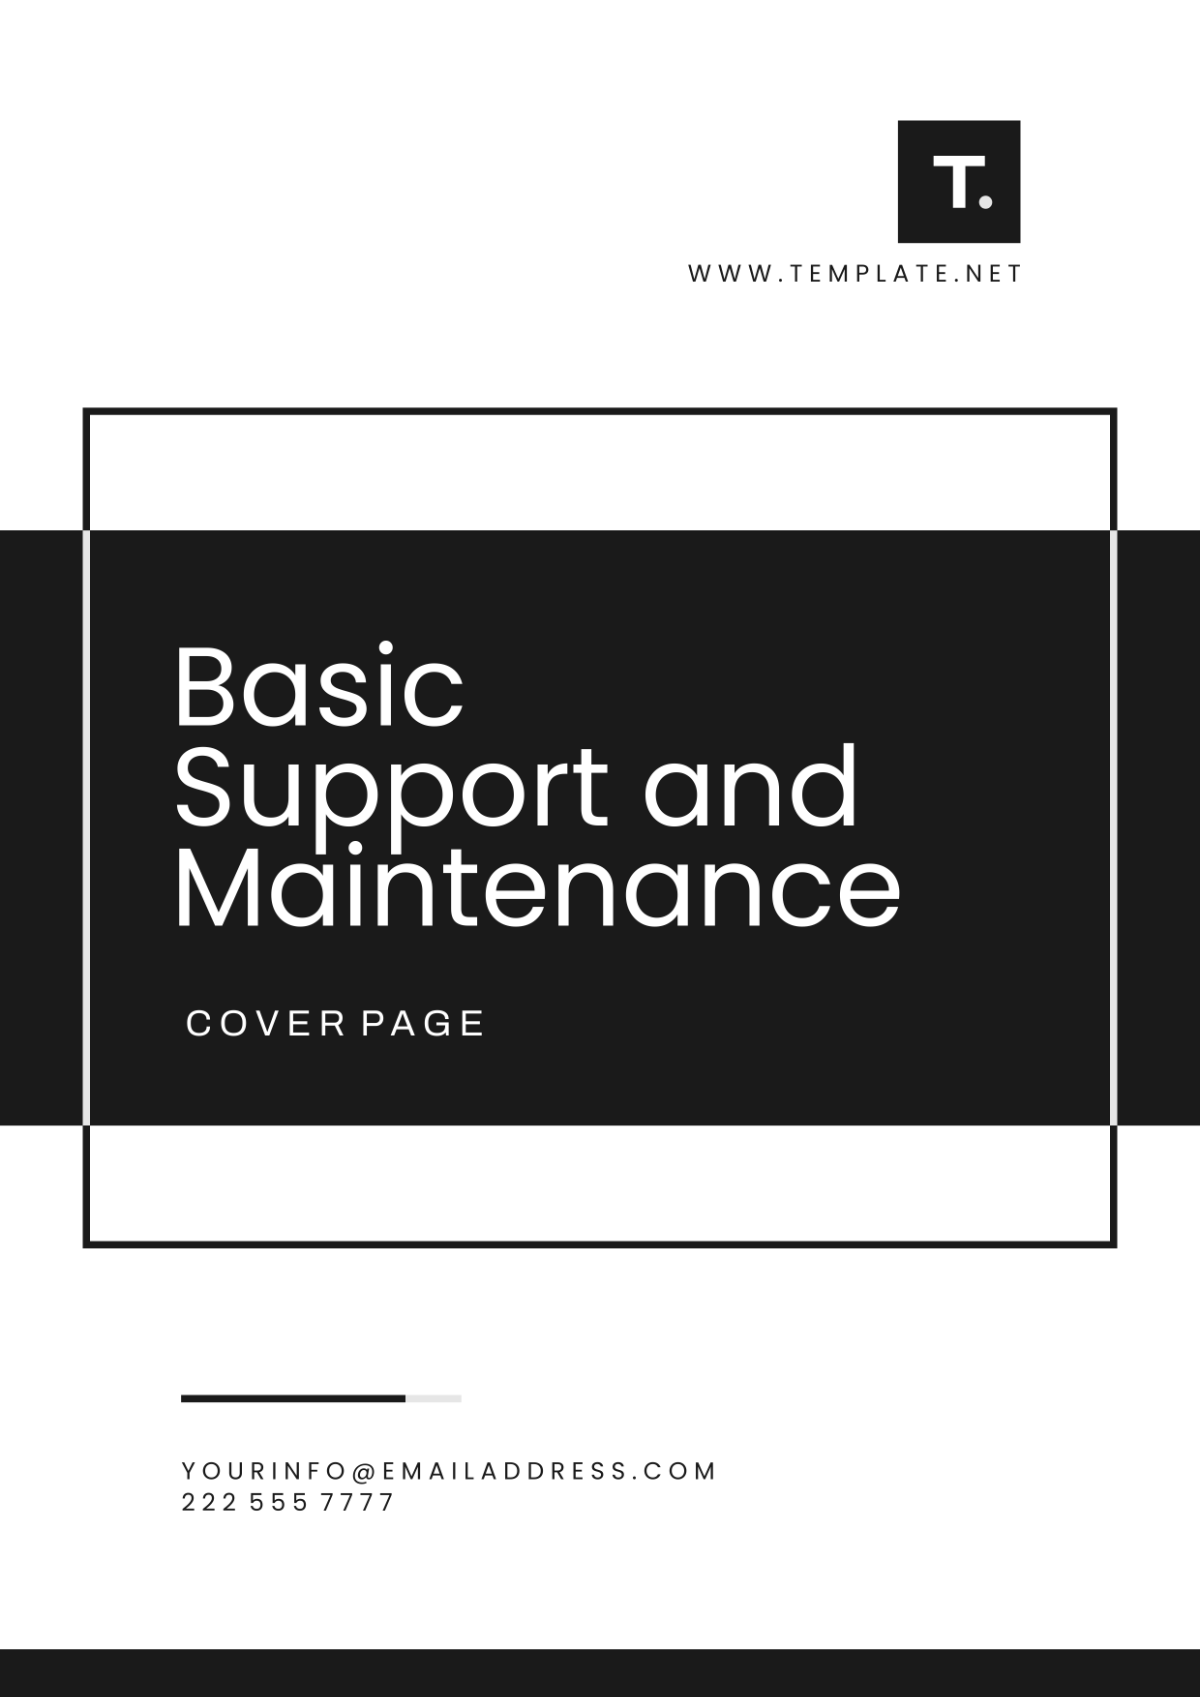 Basic Support and Maintenance Cover Page Template